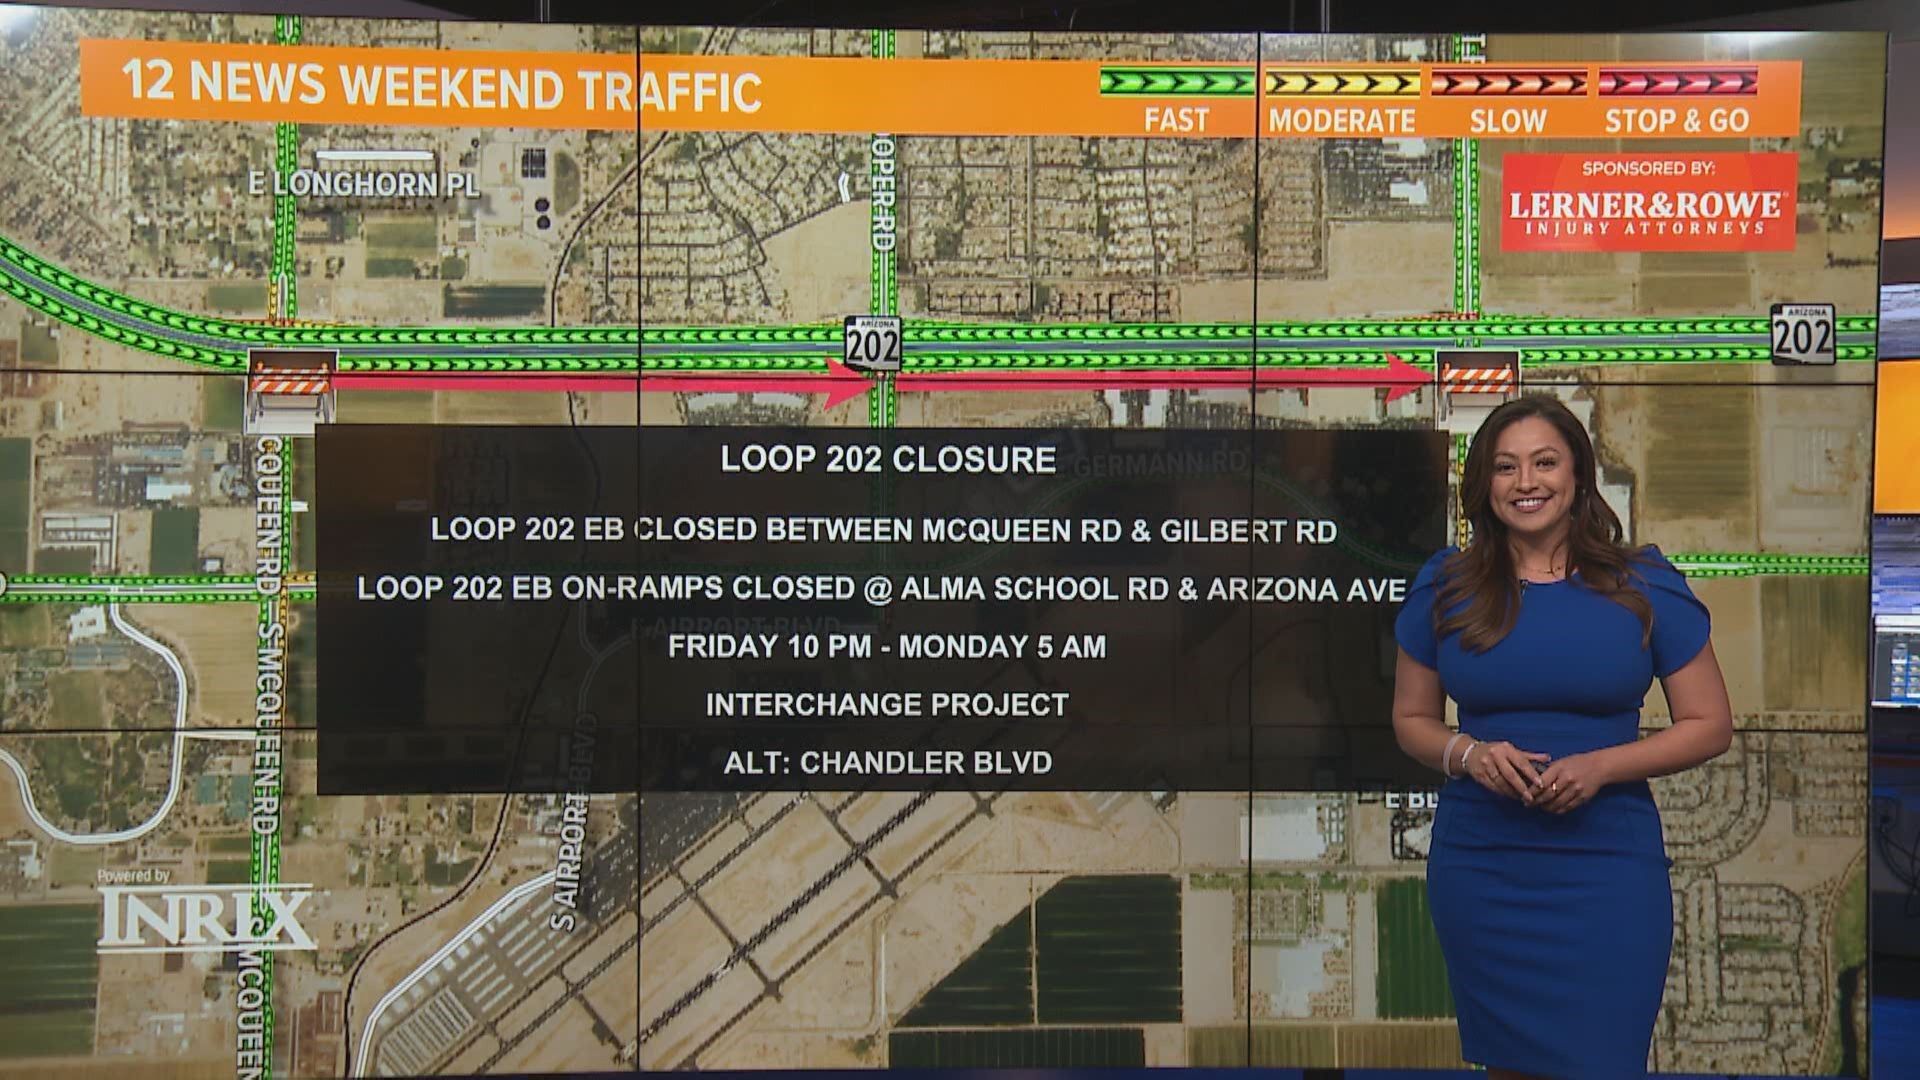 Vanessa Ramirez has all the information on the latest road closures and detours going on across the Valley this weekend.